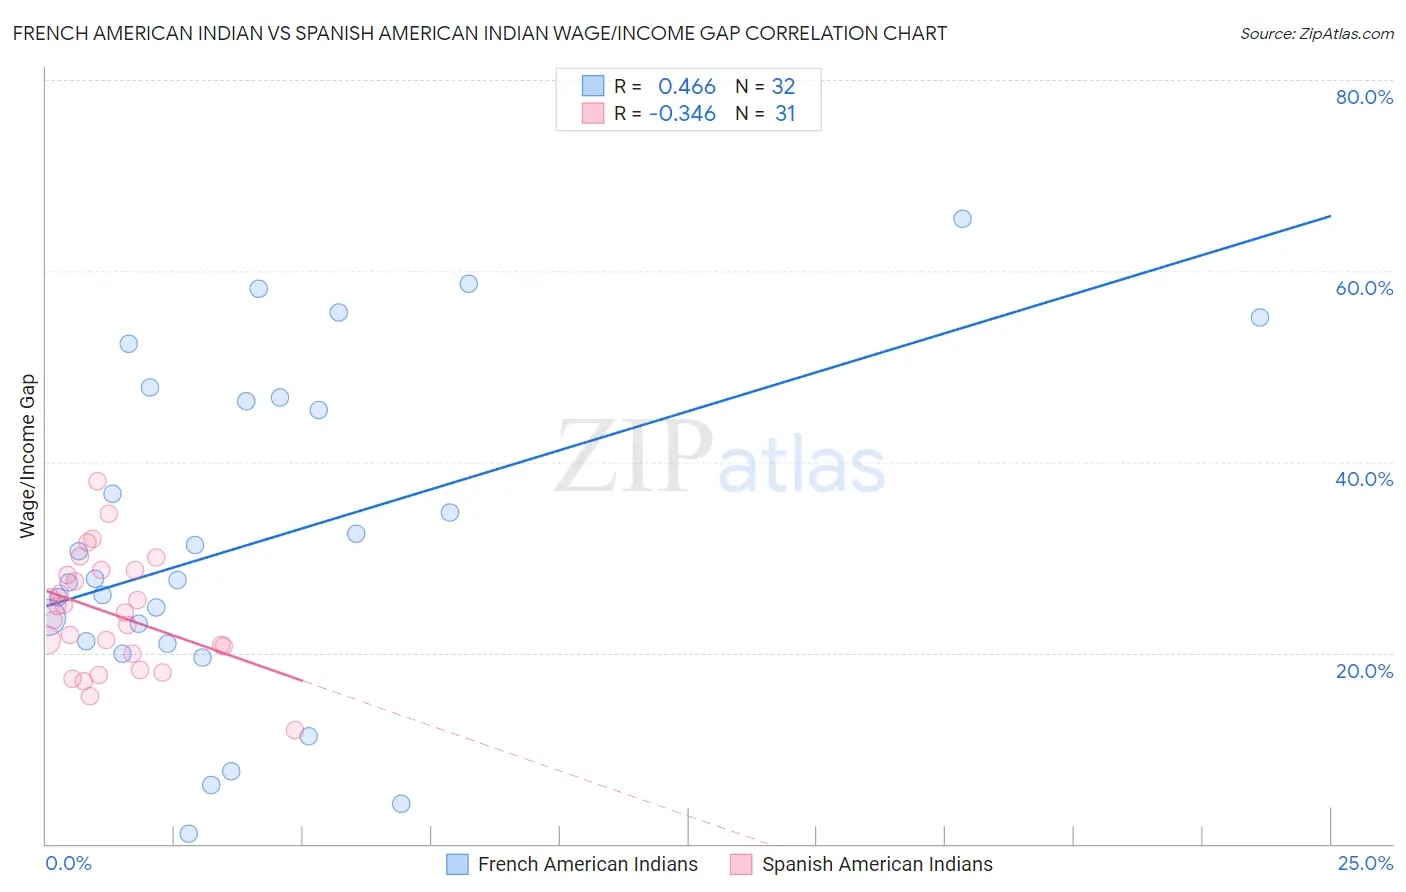 French American Indian vs Spanish American Indian Wage/Income Gap